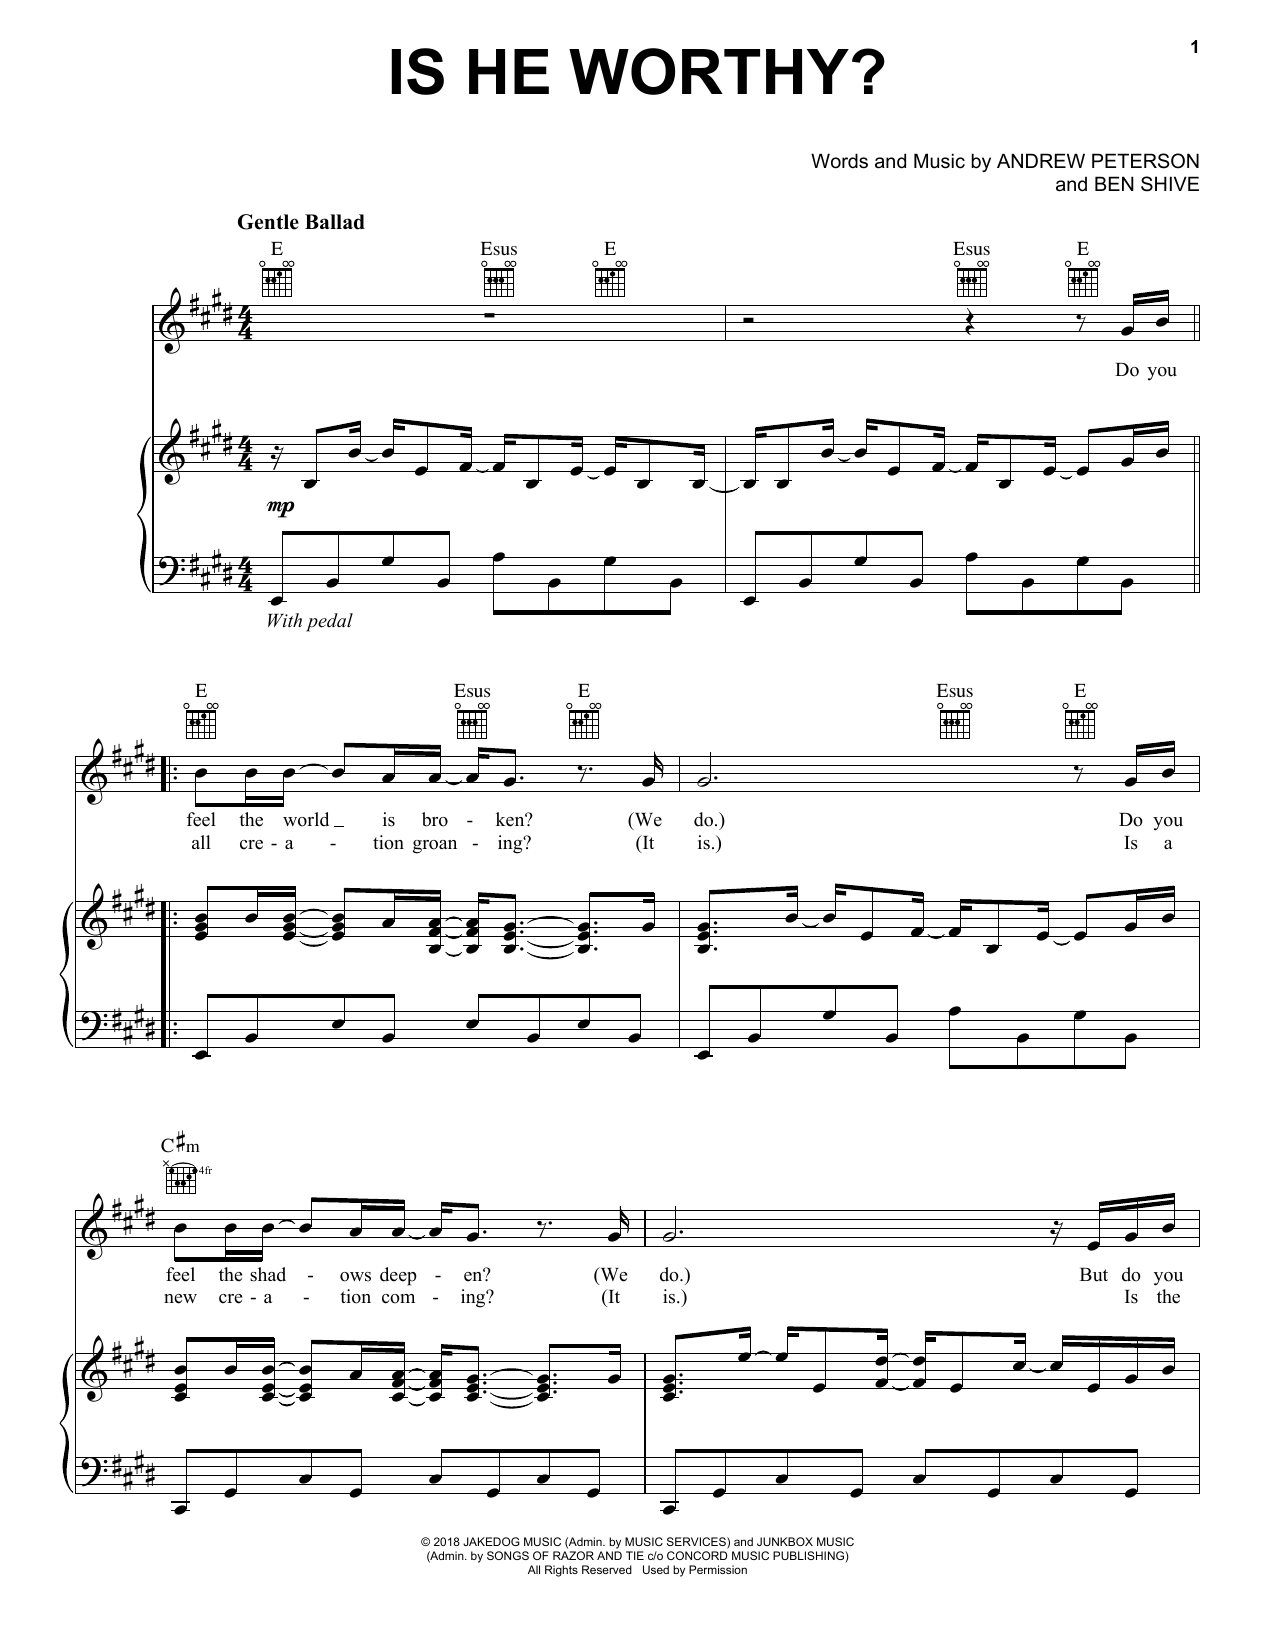 Chris Tomlin Is He Worthy? sheet music notes and chords. Download Printable PDF.